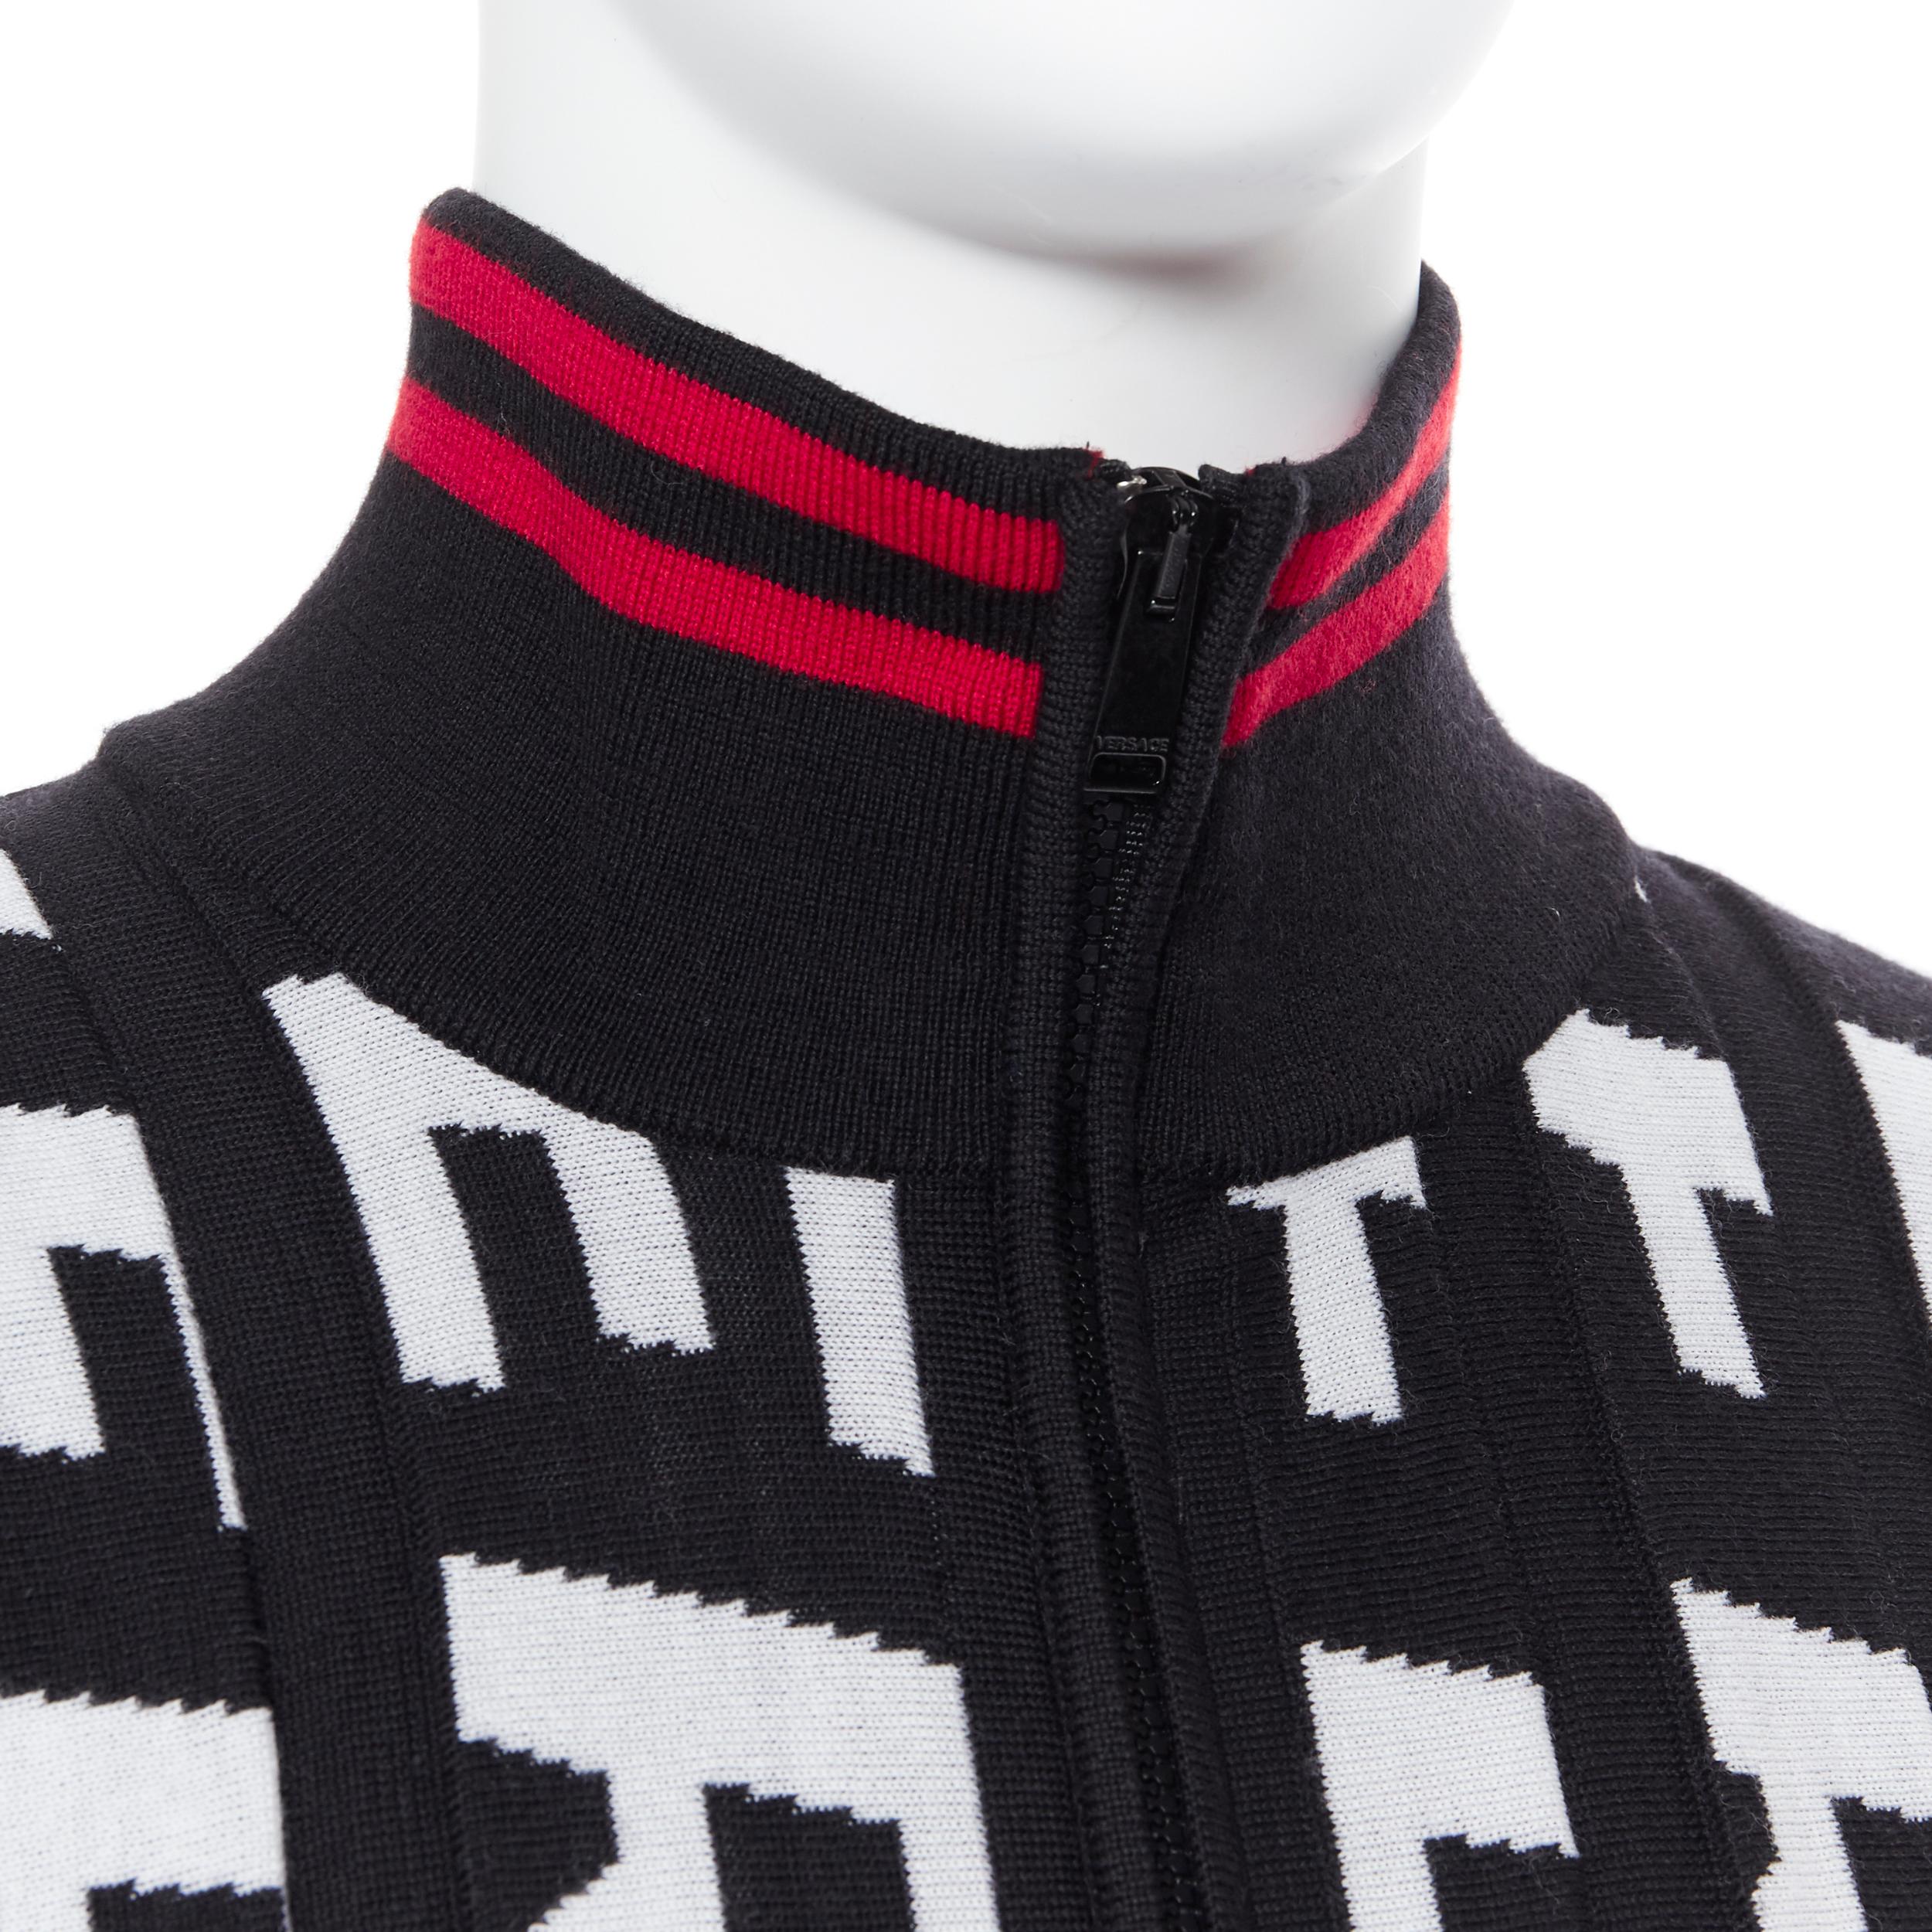 new VERSACE 100% wool black bold logo jacquard red trimmed cardigan IT54 3XL
Brand: Versace
Designer: Donatella Versace
Collection: 2019
Model Name / Style: Logo cardigan
Material: Wool
Color: Black
Pattern: Abstract
Closure: Zip
Extra Detail: 100%